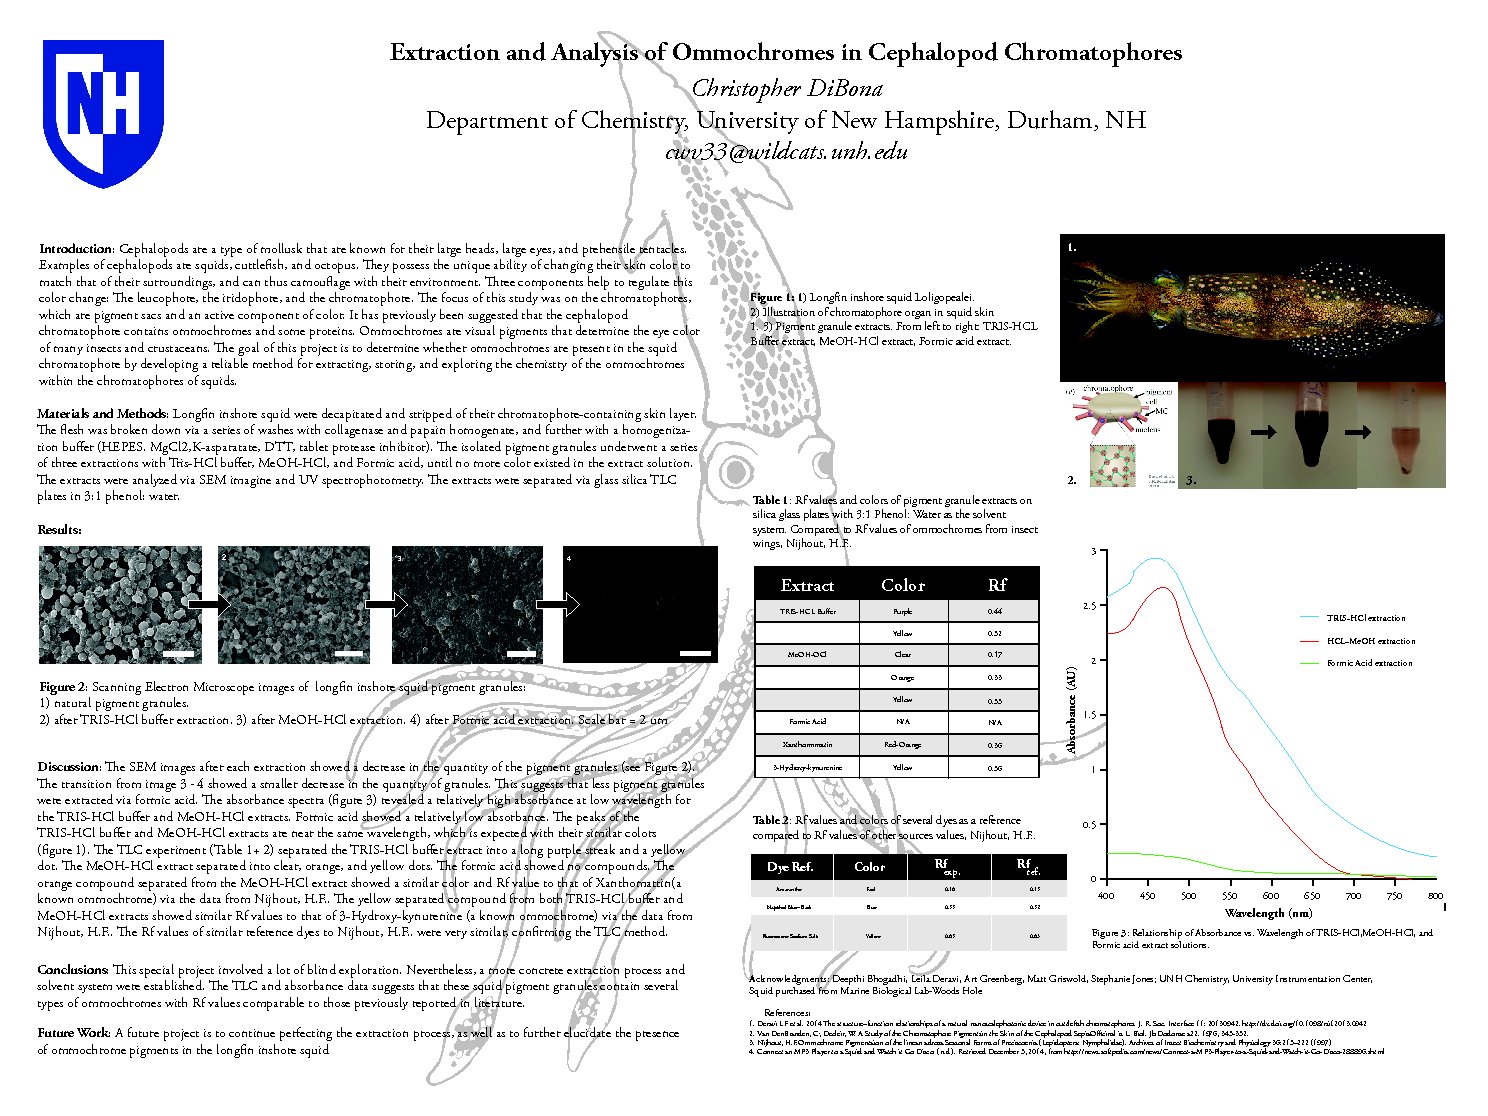 Extraction And Analysis Of Ommochromes In Cephalopod Chromatophores by cwv33